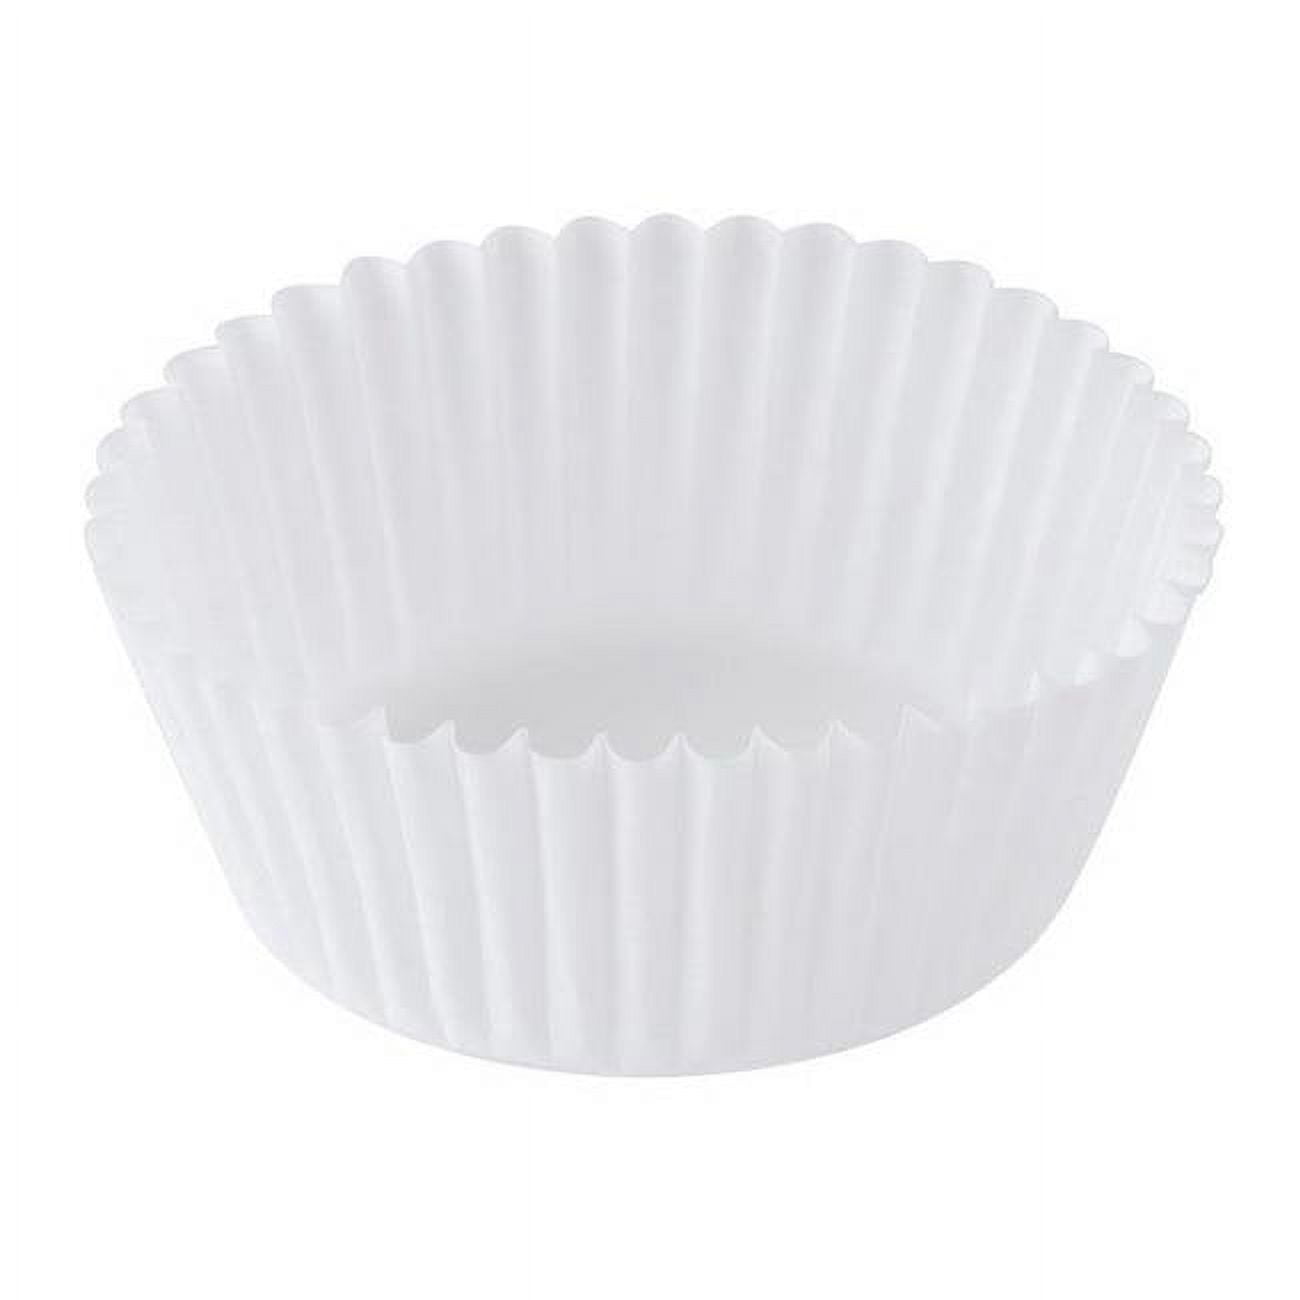 Fc225x600 Bake Cup, 6 In. White - Case Of 10000